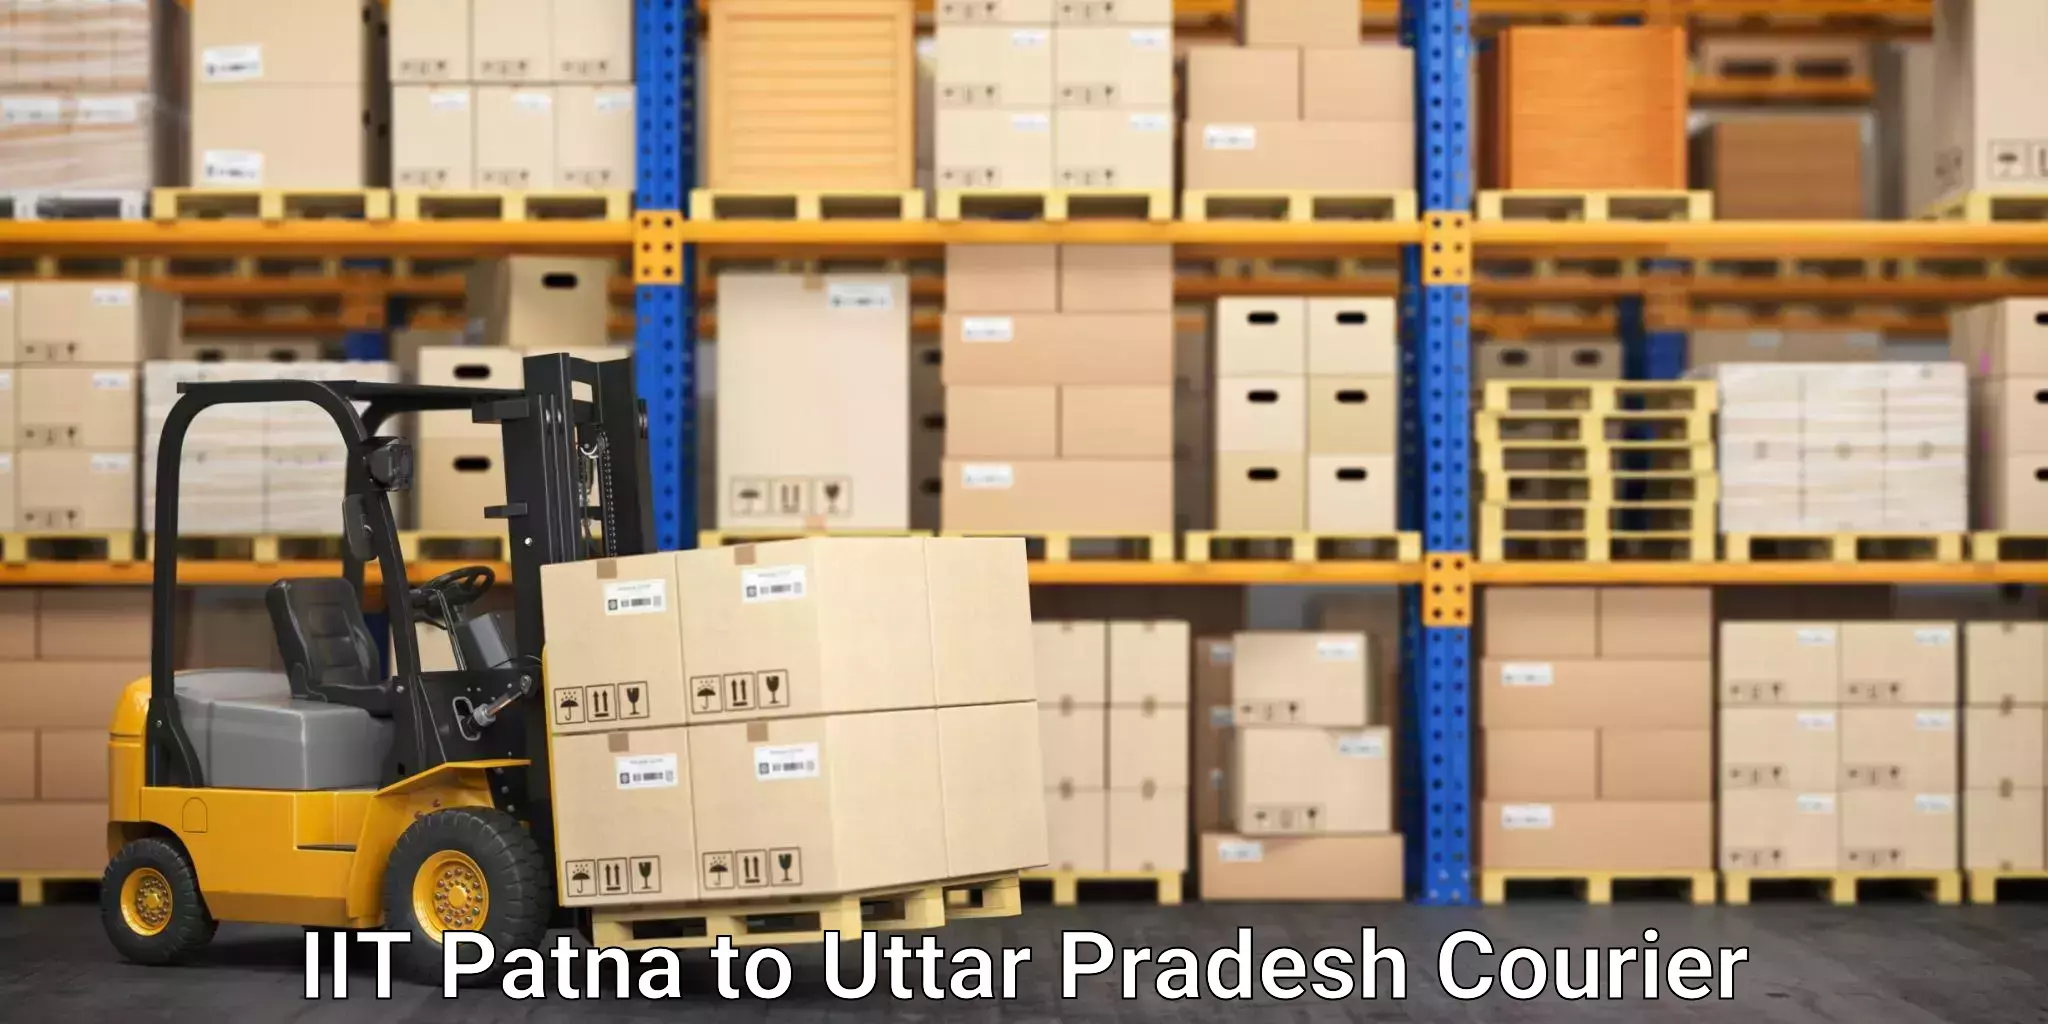 Moving and storage services in IIT Patna to Kasganj